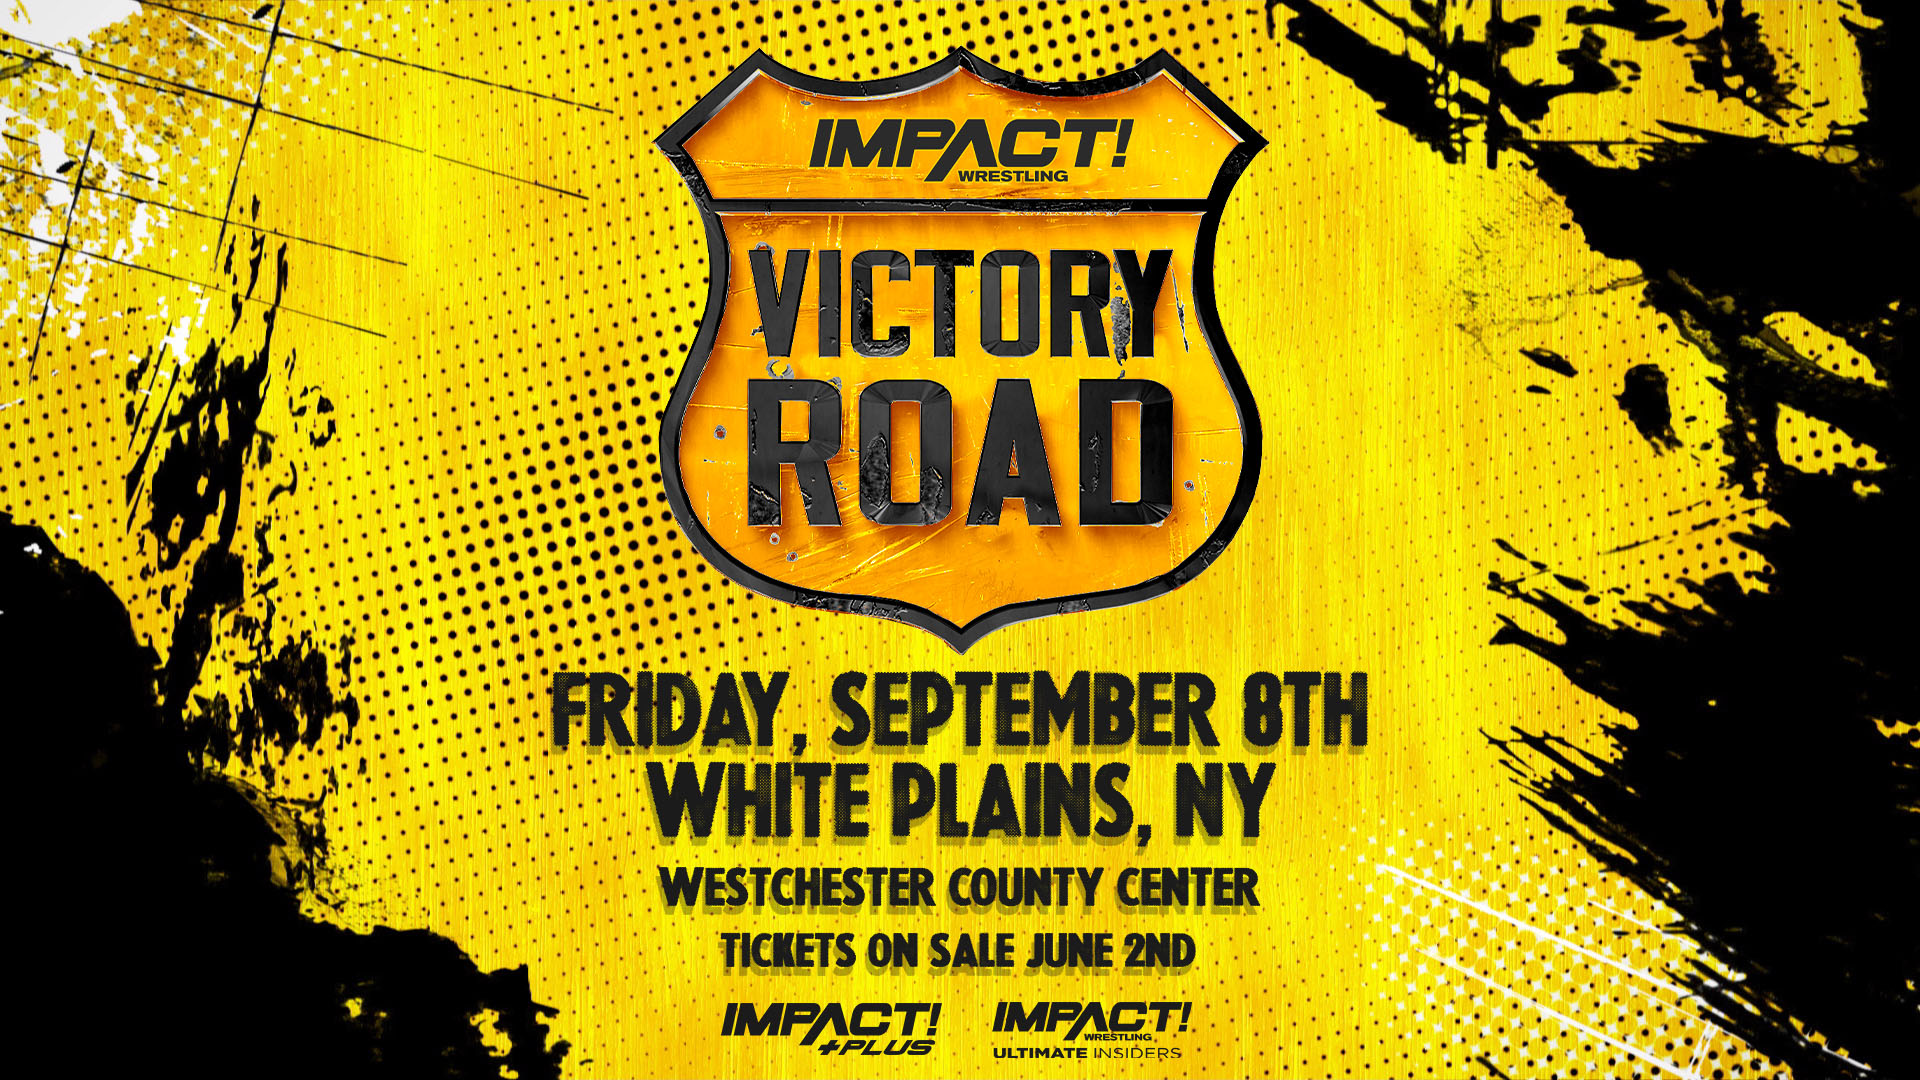 IMPACT Wrestling Presents Victory Road LIVE September 8th on IMPACT Plus – IMPACT Wrestling